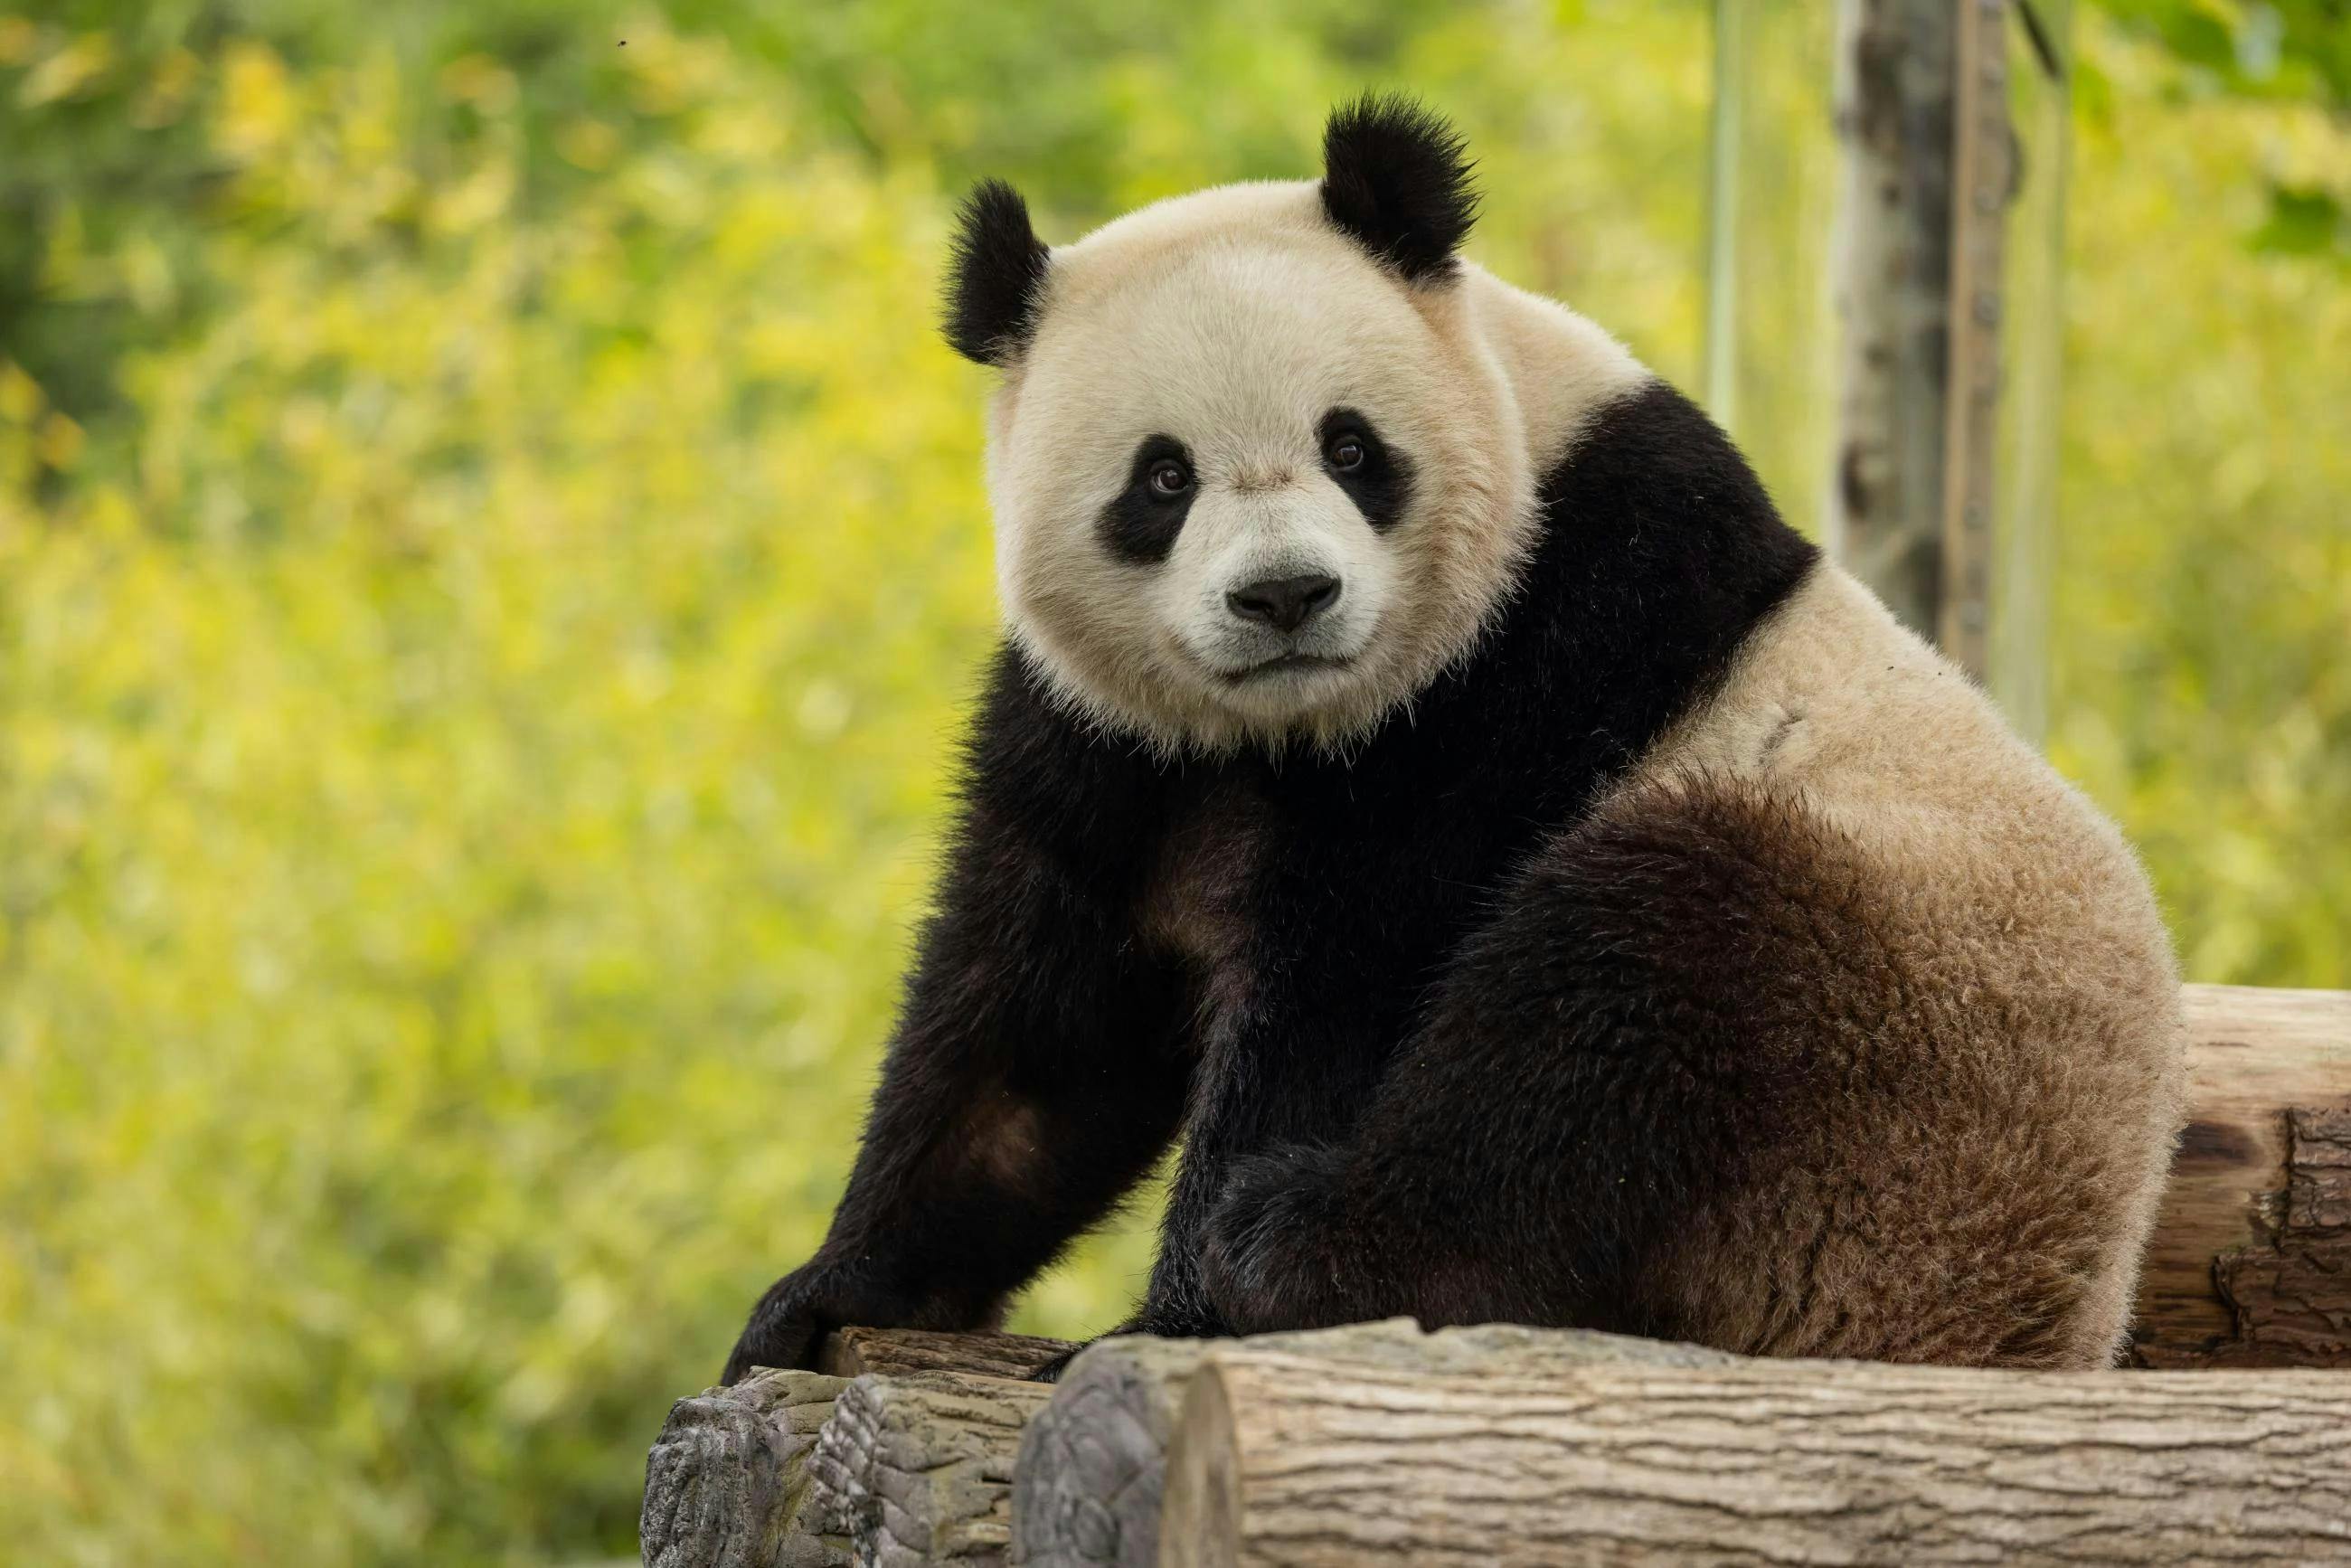 Bao Li in his habitat at Shenshuping Base in Wolong, China. (Photo credit: Roshan Patel, Smithsonian’s National Zoo and Conservation Biology Institute)